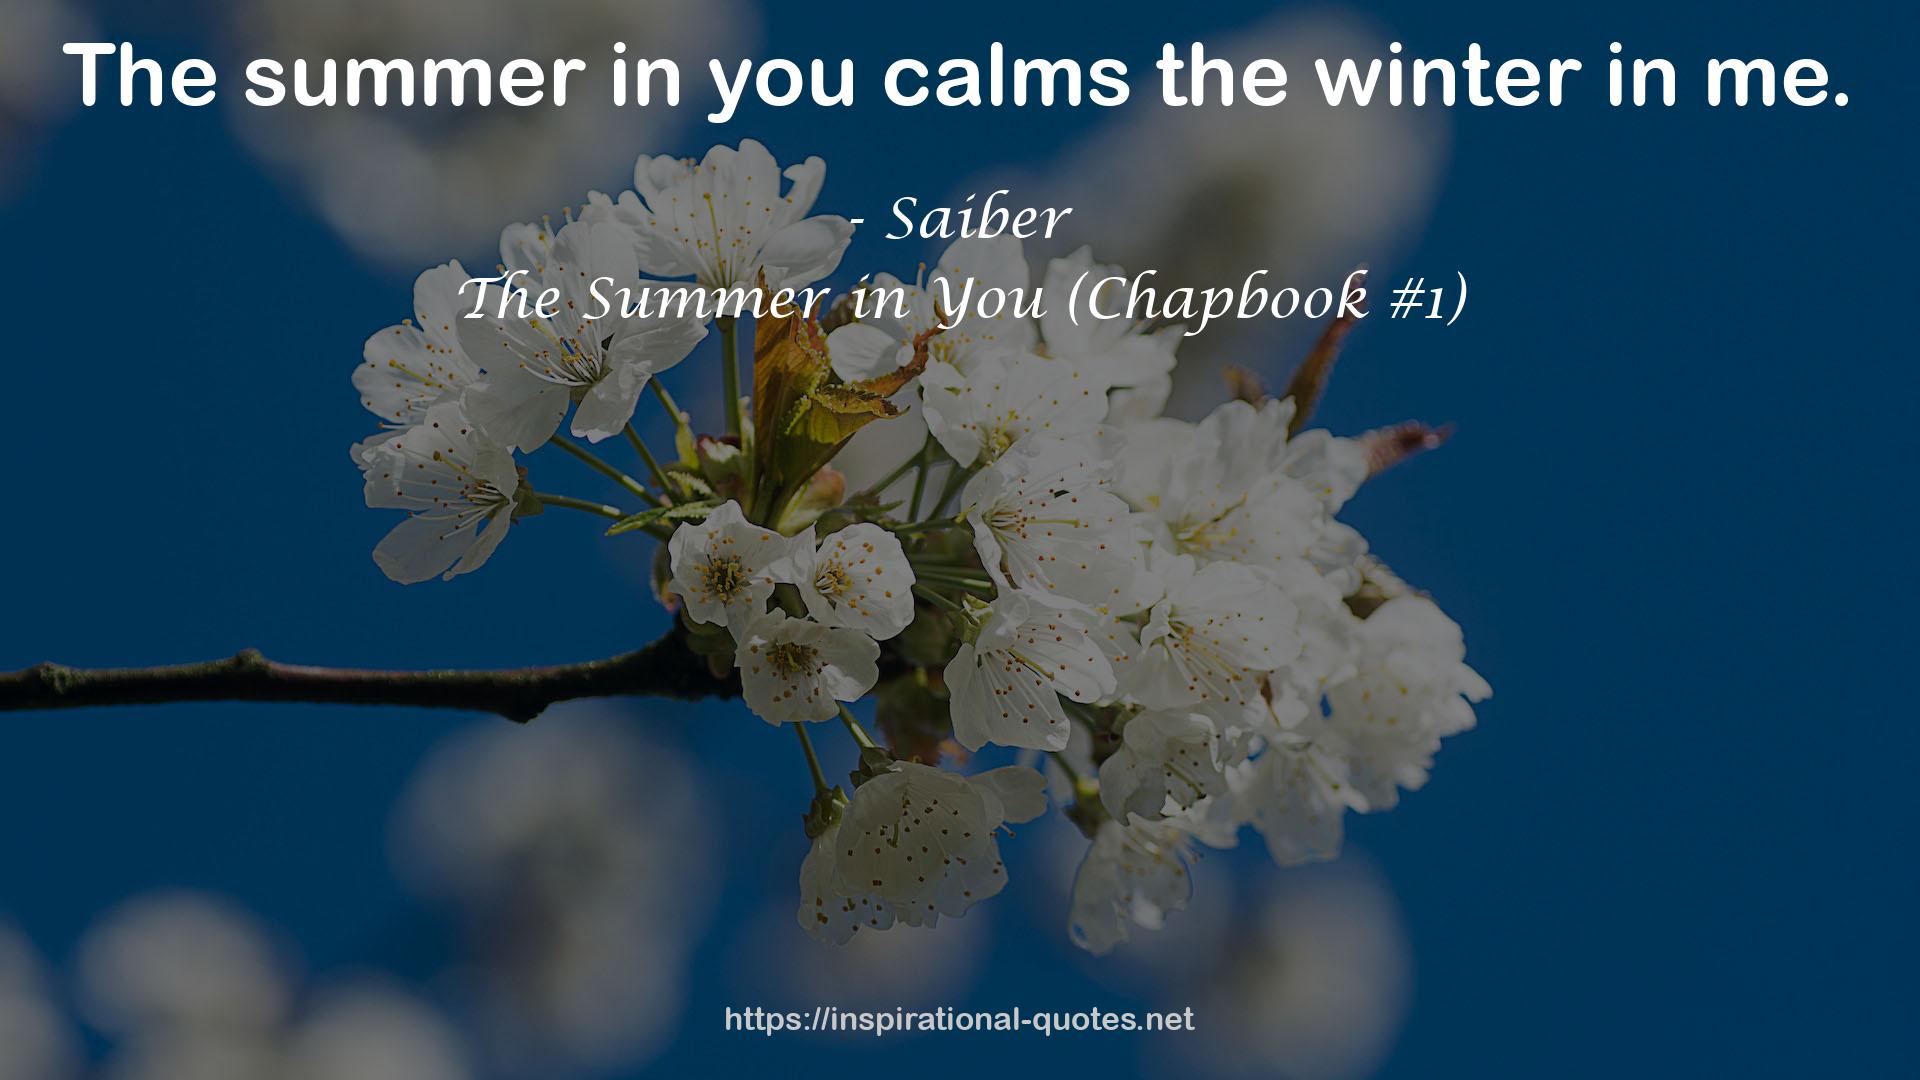 The Summer in You (Chapbook #1) QUOTES